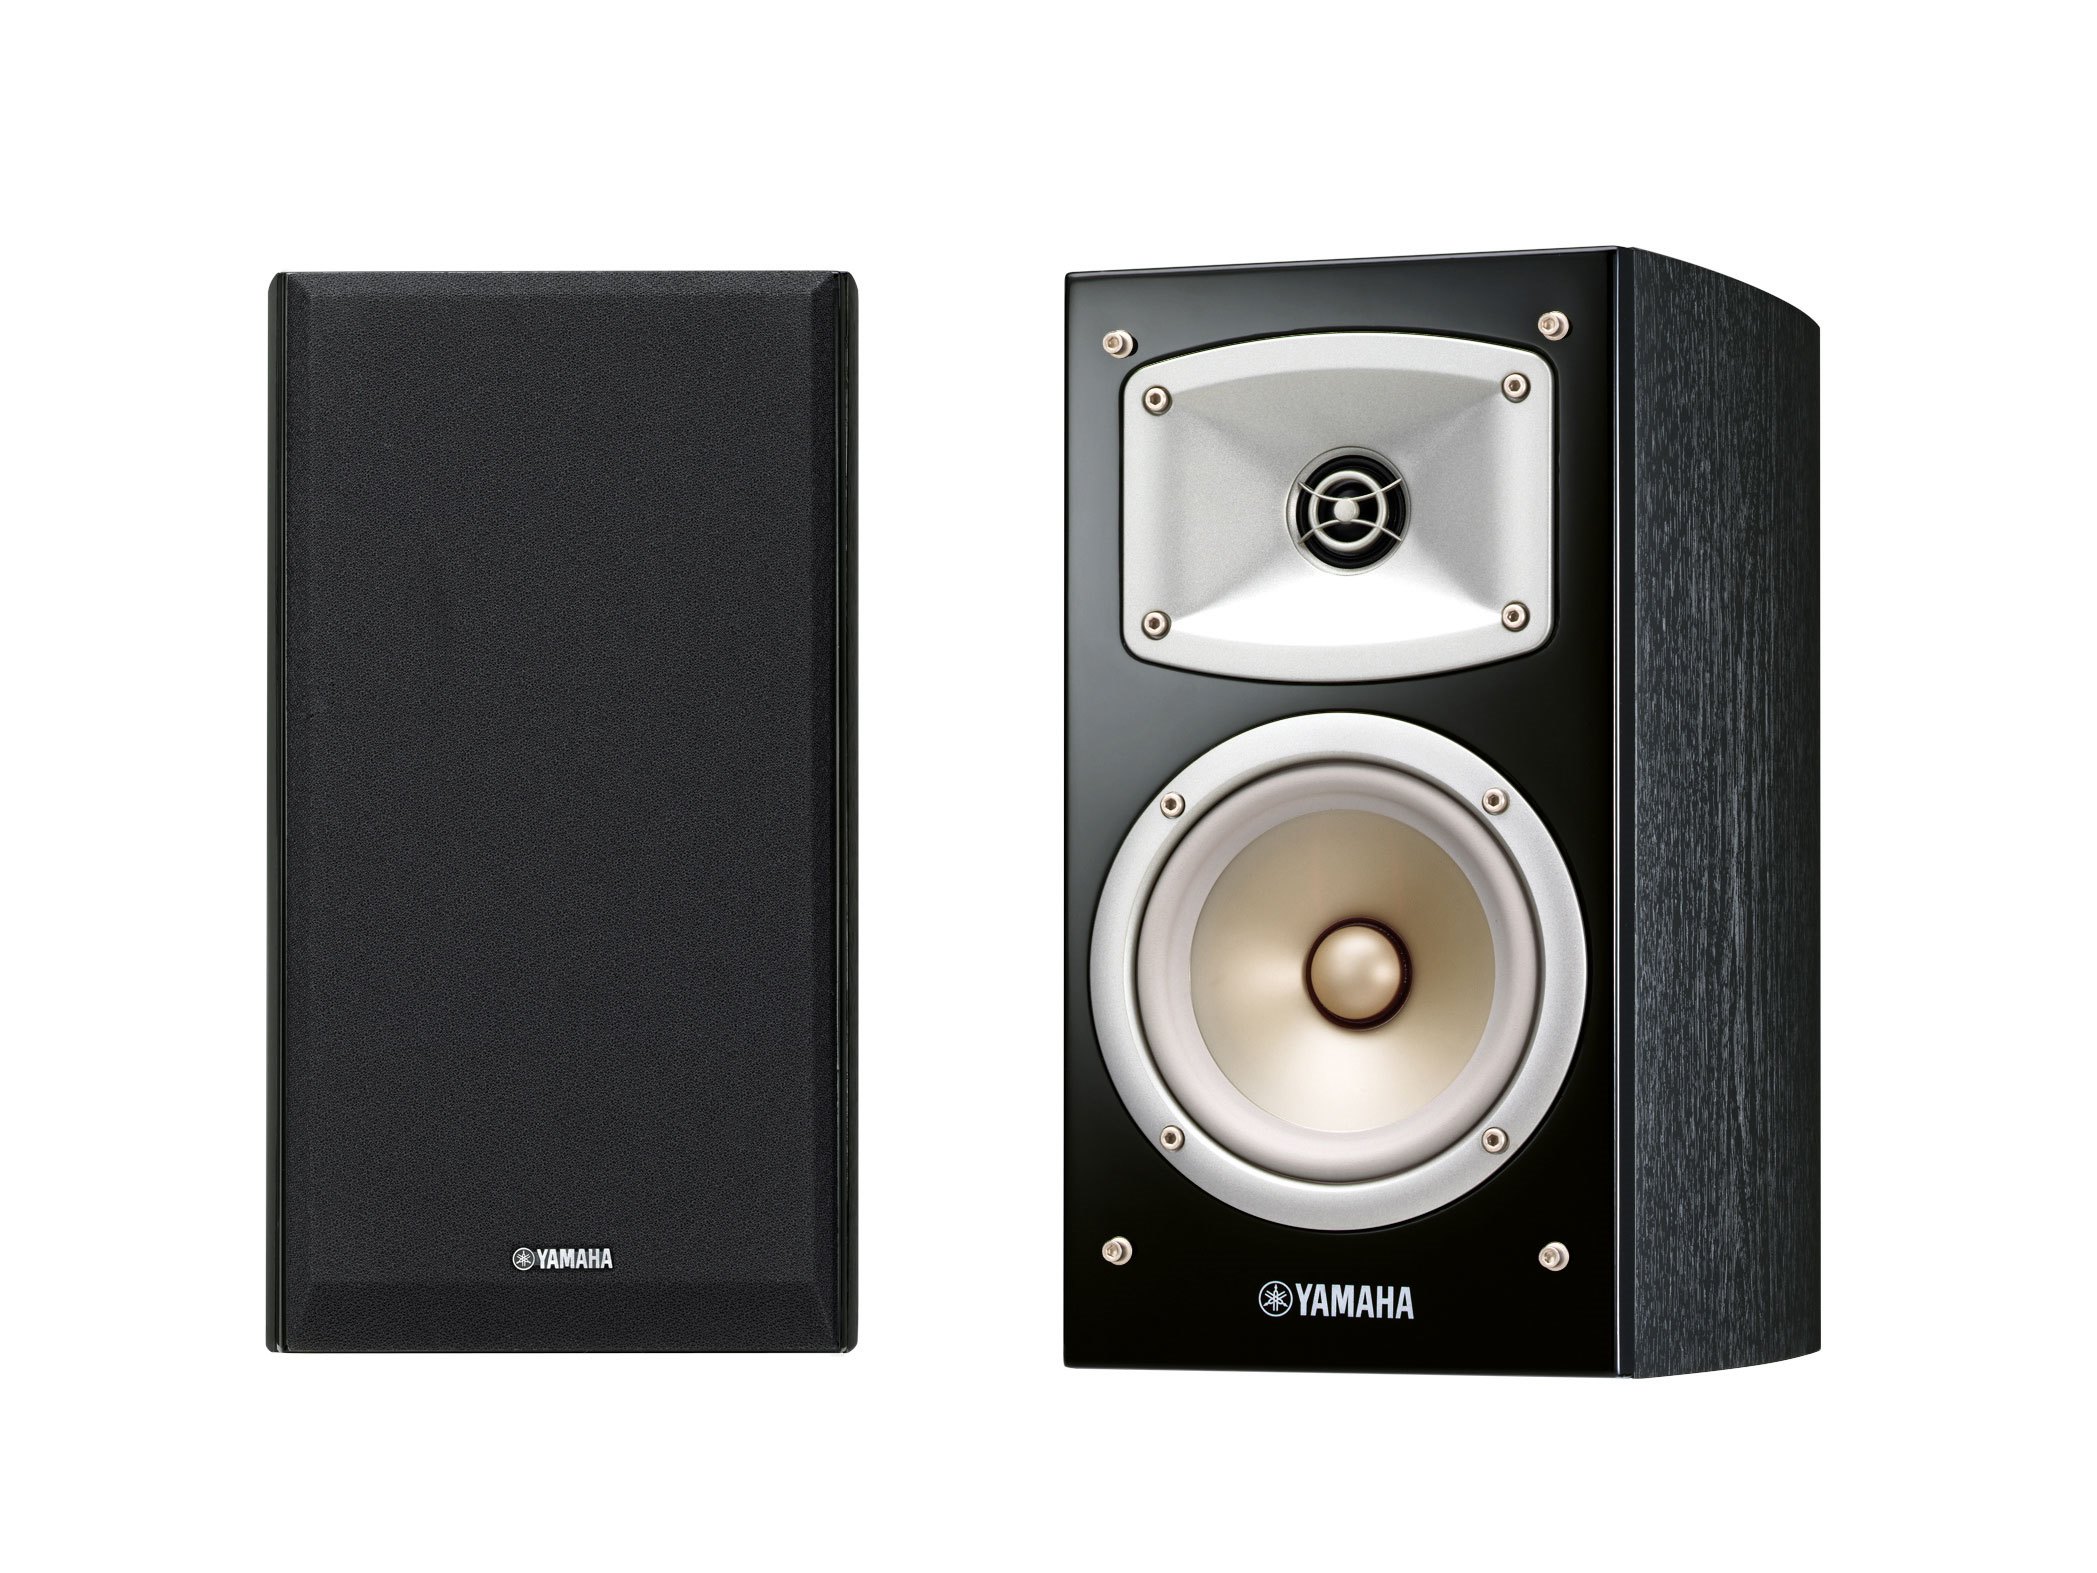 NS-B330 - Overview - Speaker Systems - Audio & Visual - Products